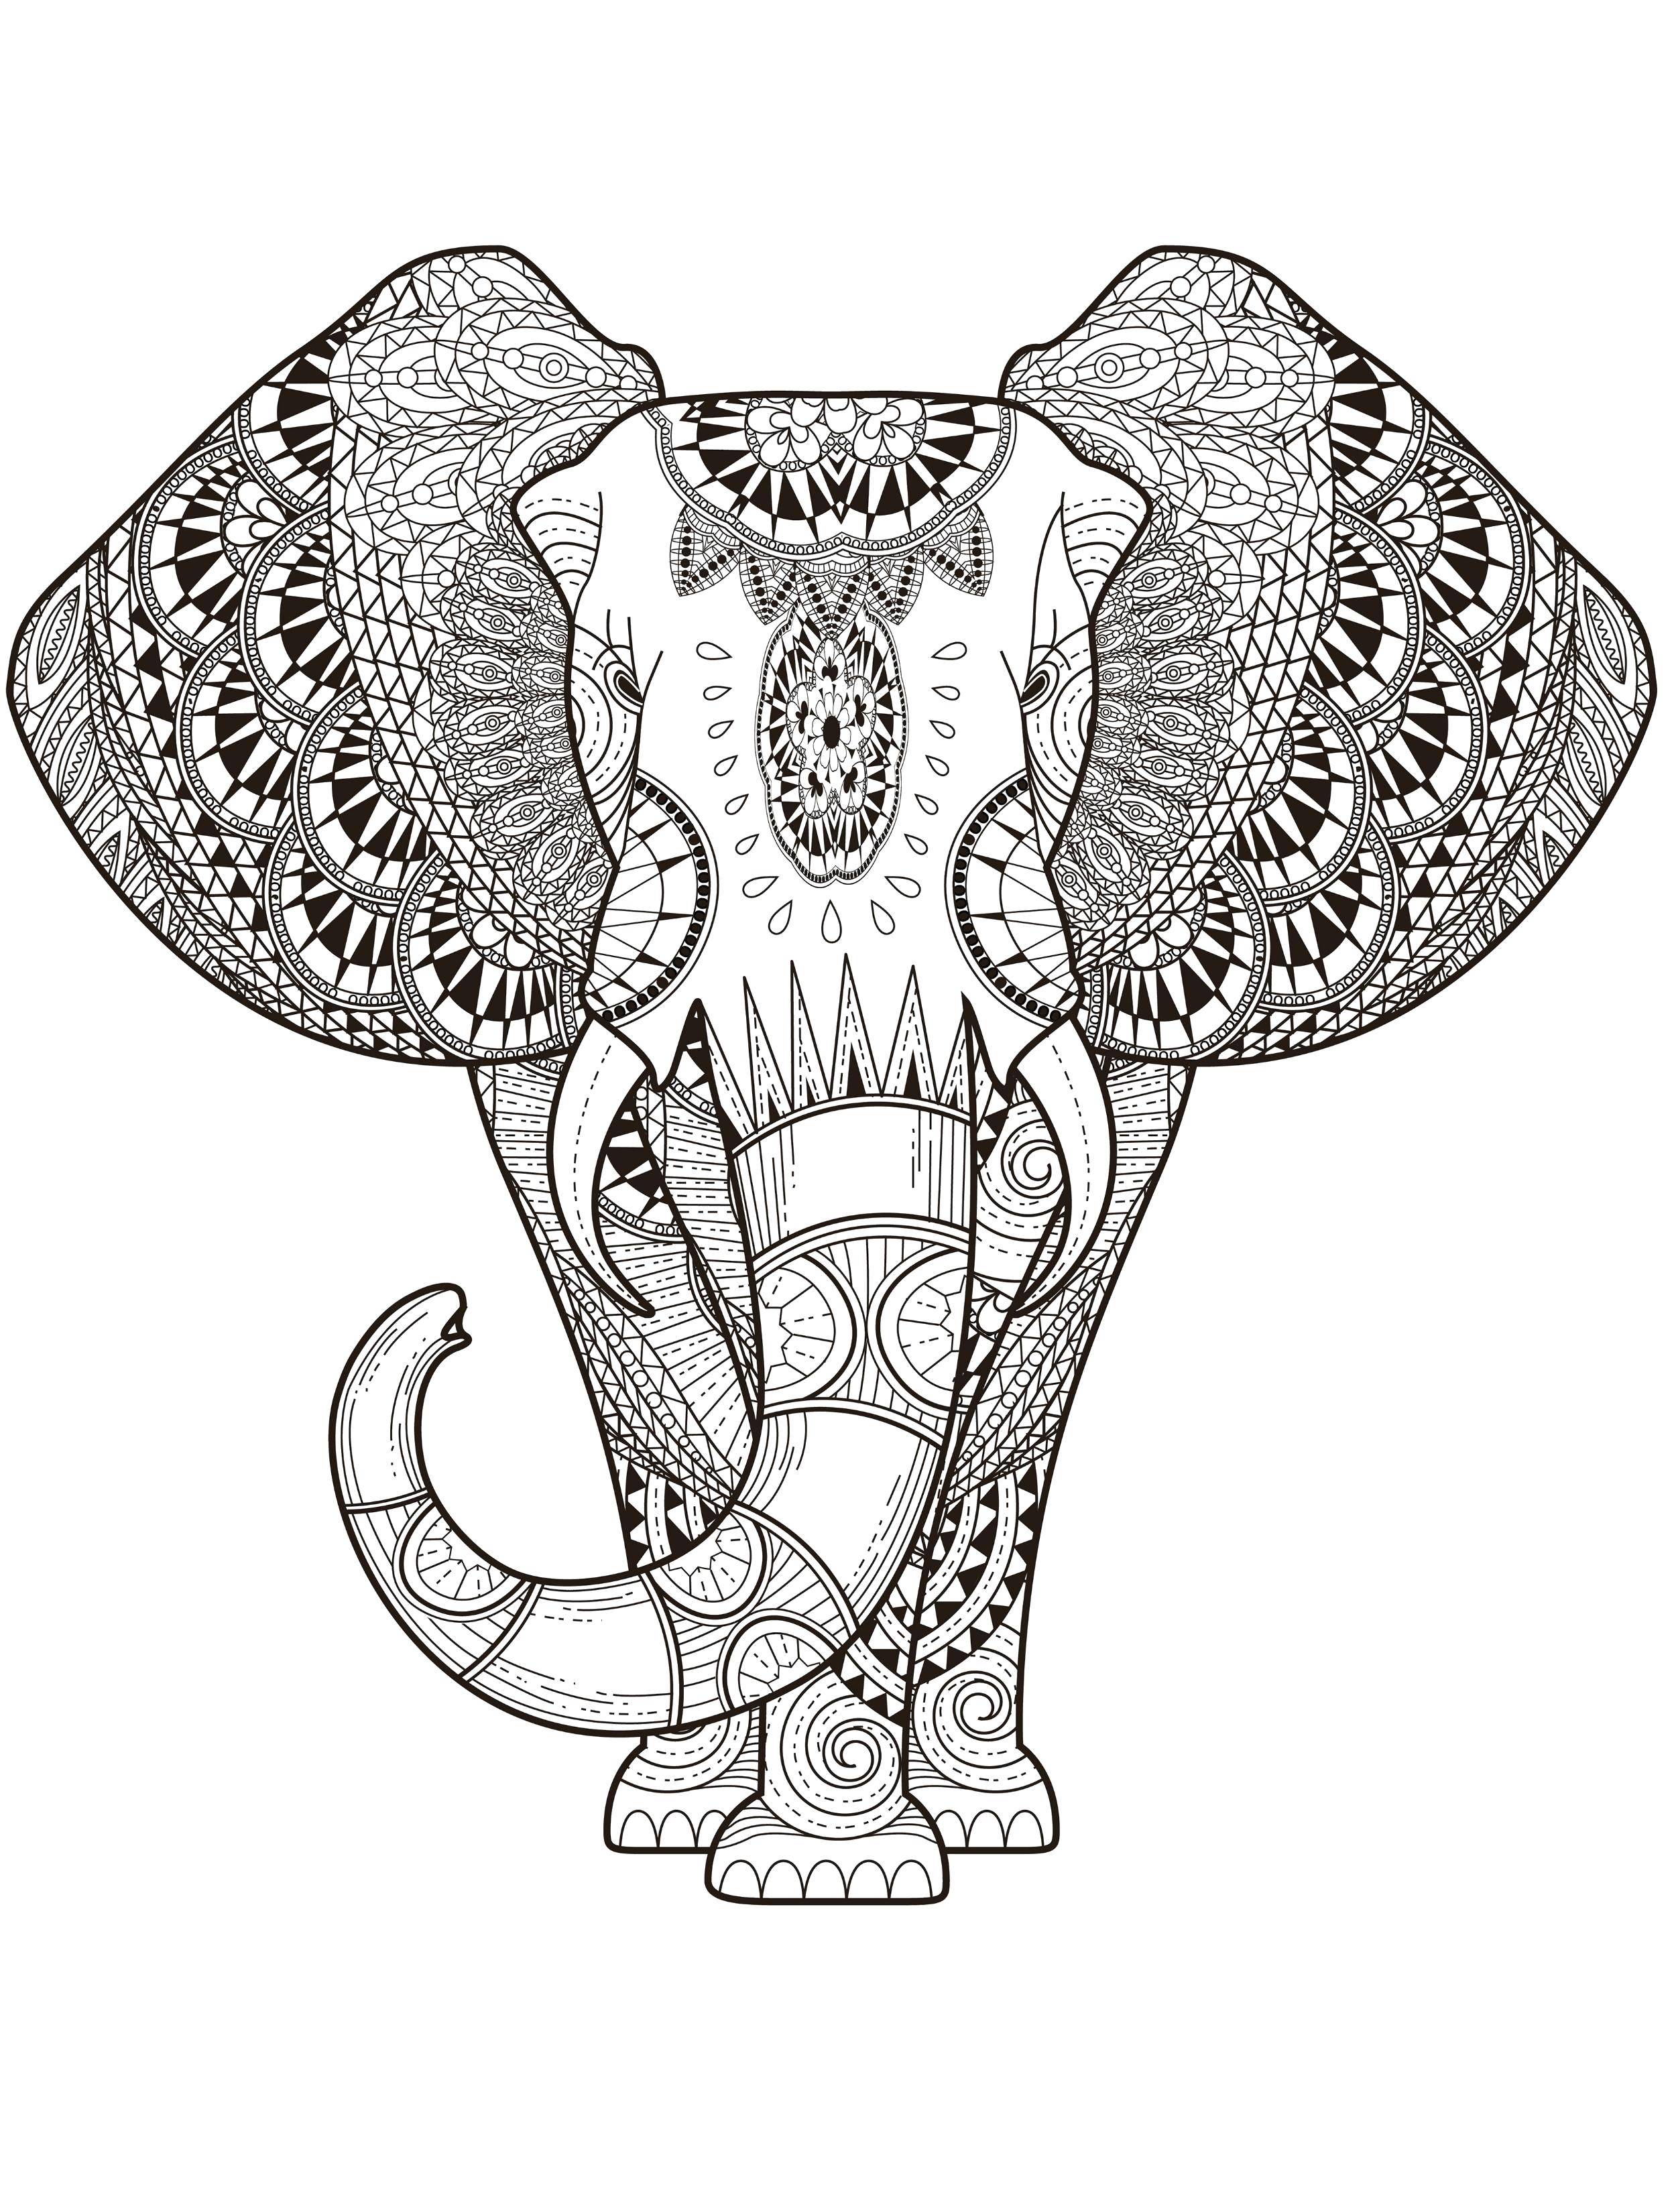 Coloring Antistress elephant. Category coloring antistress. Tags:  Animals, elephant.